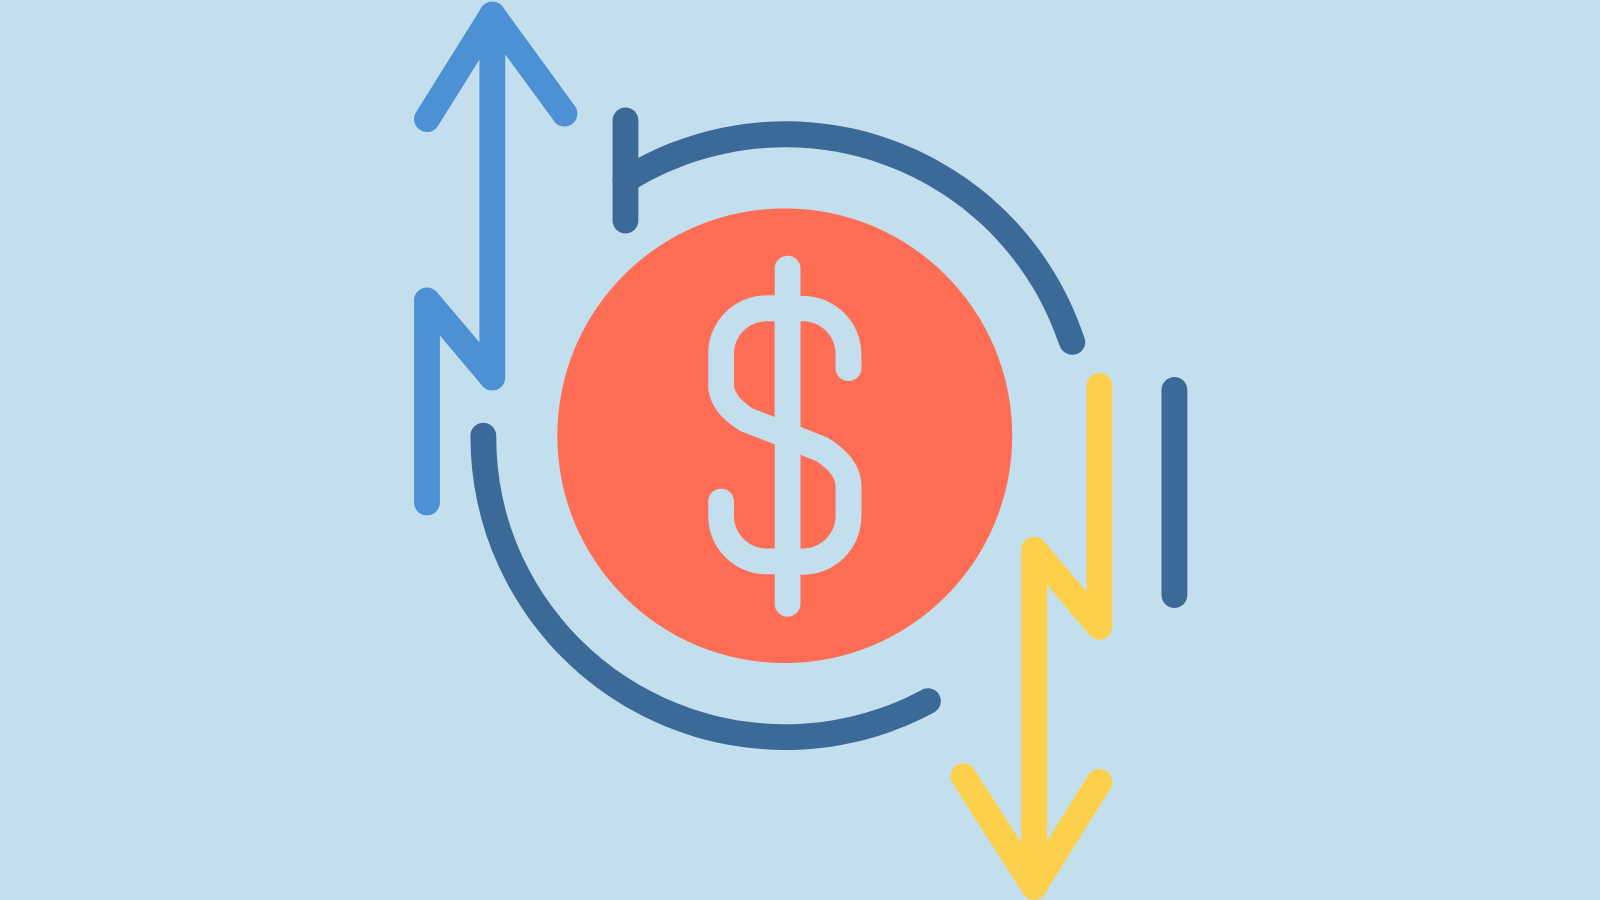 A graphic of a dollar sign in a circle with a jagged arrow pointing up on the left and a jagged arrow pointing down on the right